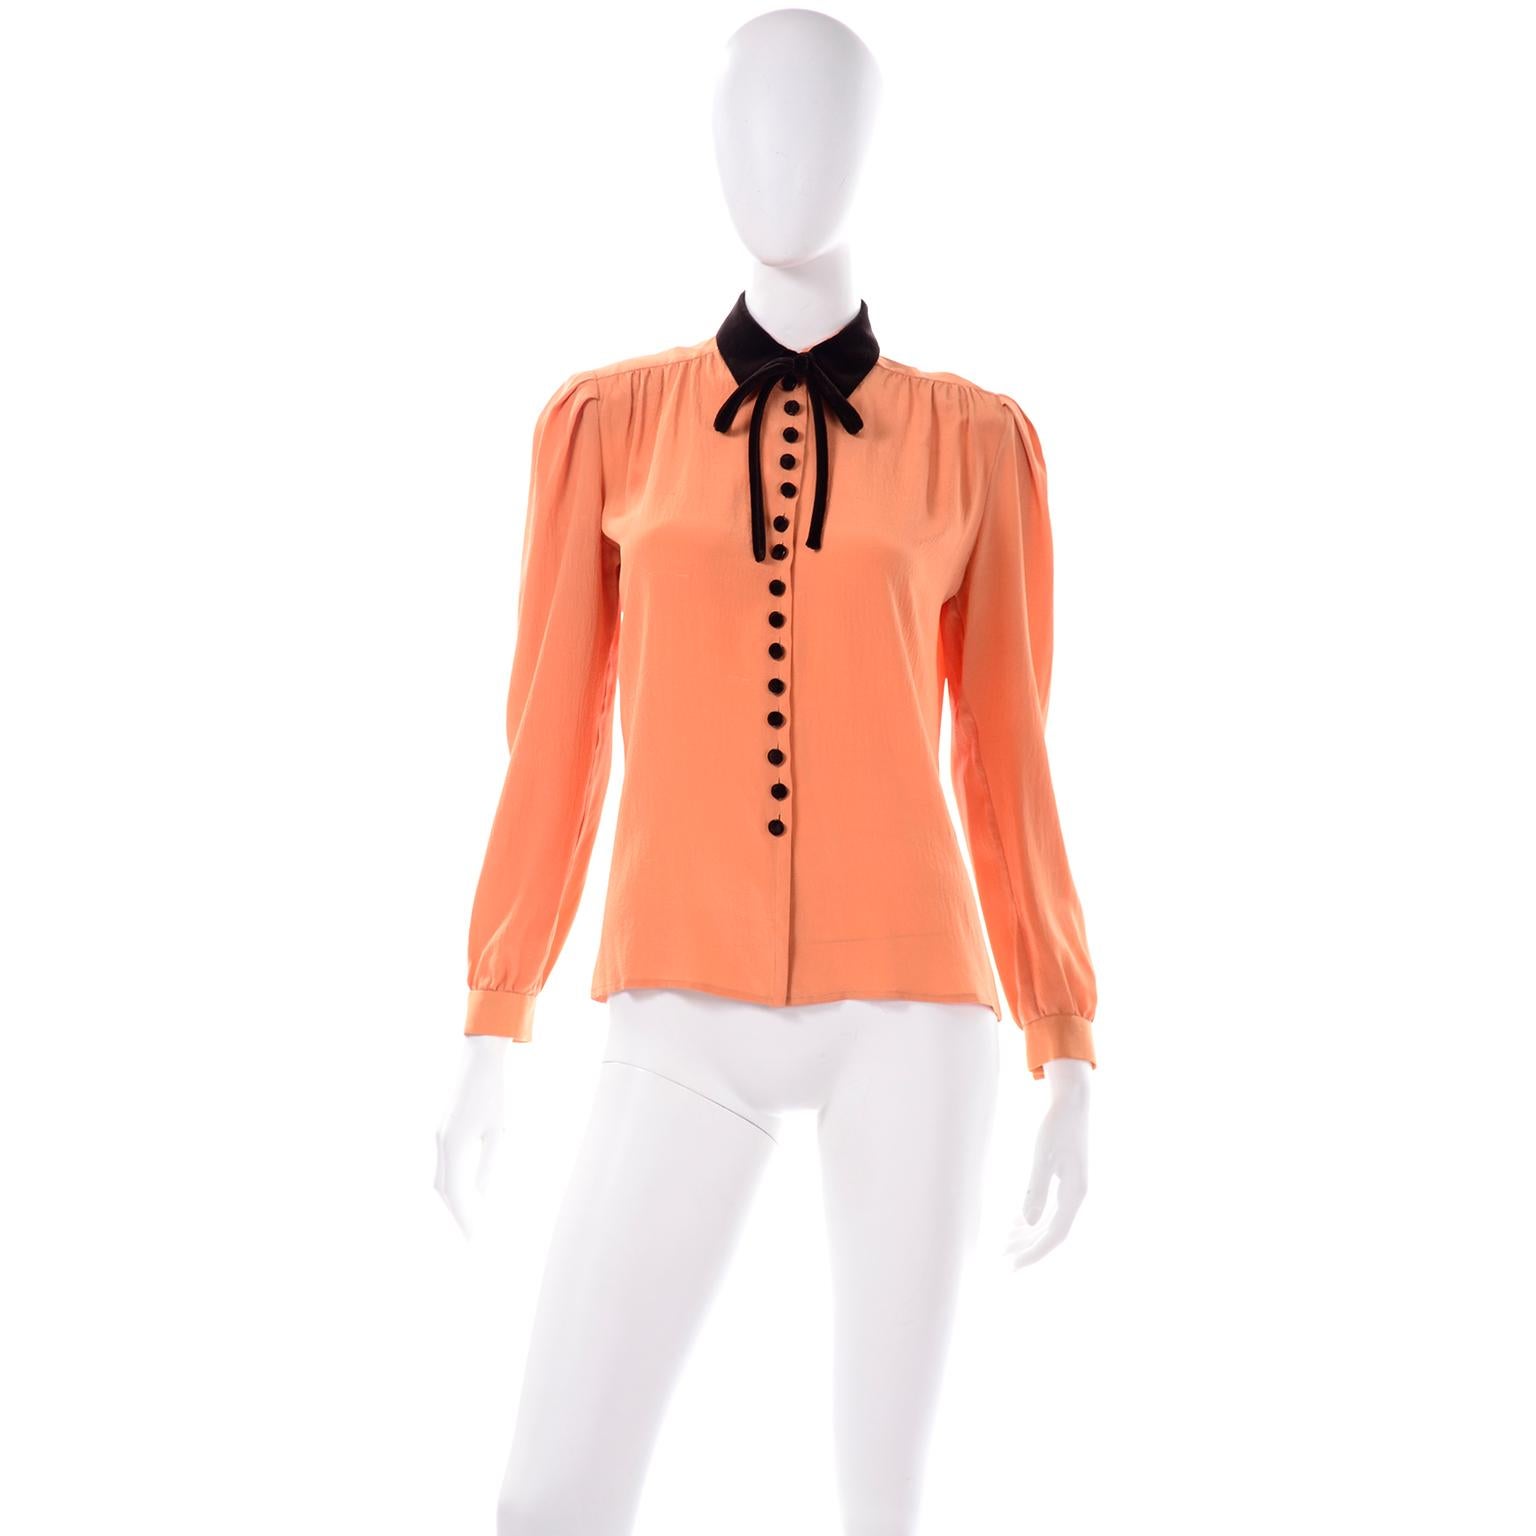 This is an exquisite Valentino Boutique vintage orange silk blouse with a brown velvet collar, brown tie and brown velvet fabric covered buttons. We love the pretty gathers t the shoulders and the lovely way the blouse fits. This piece came from an